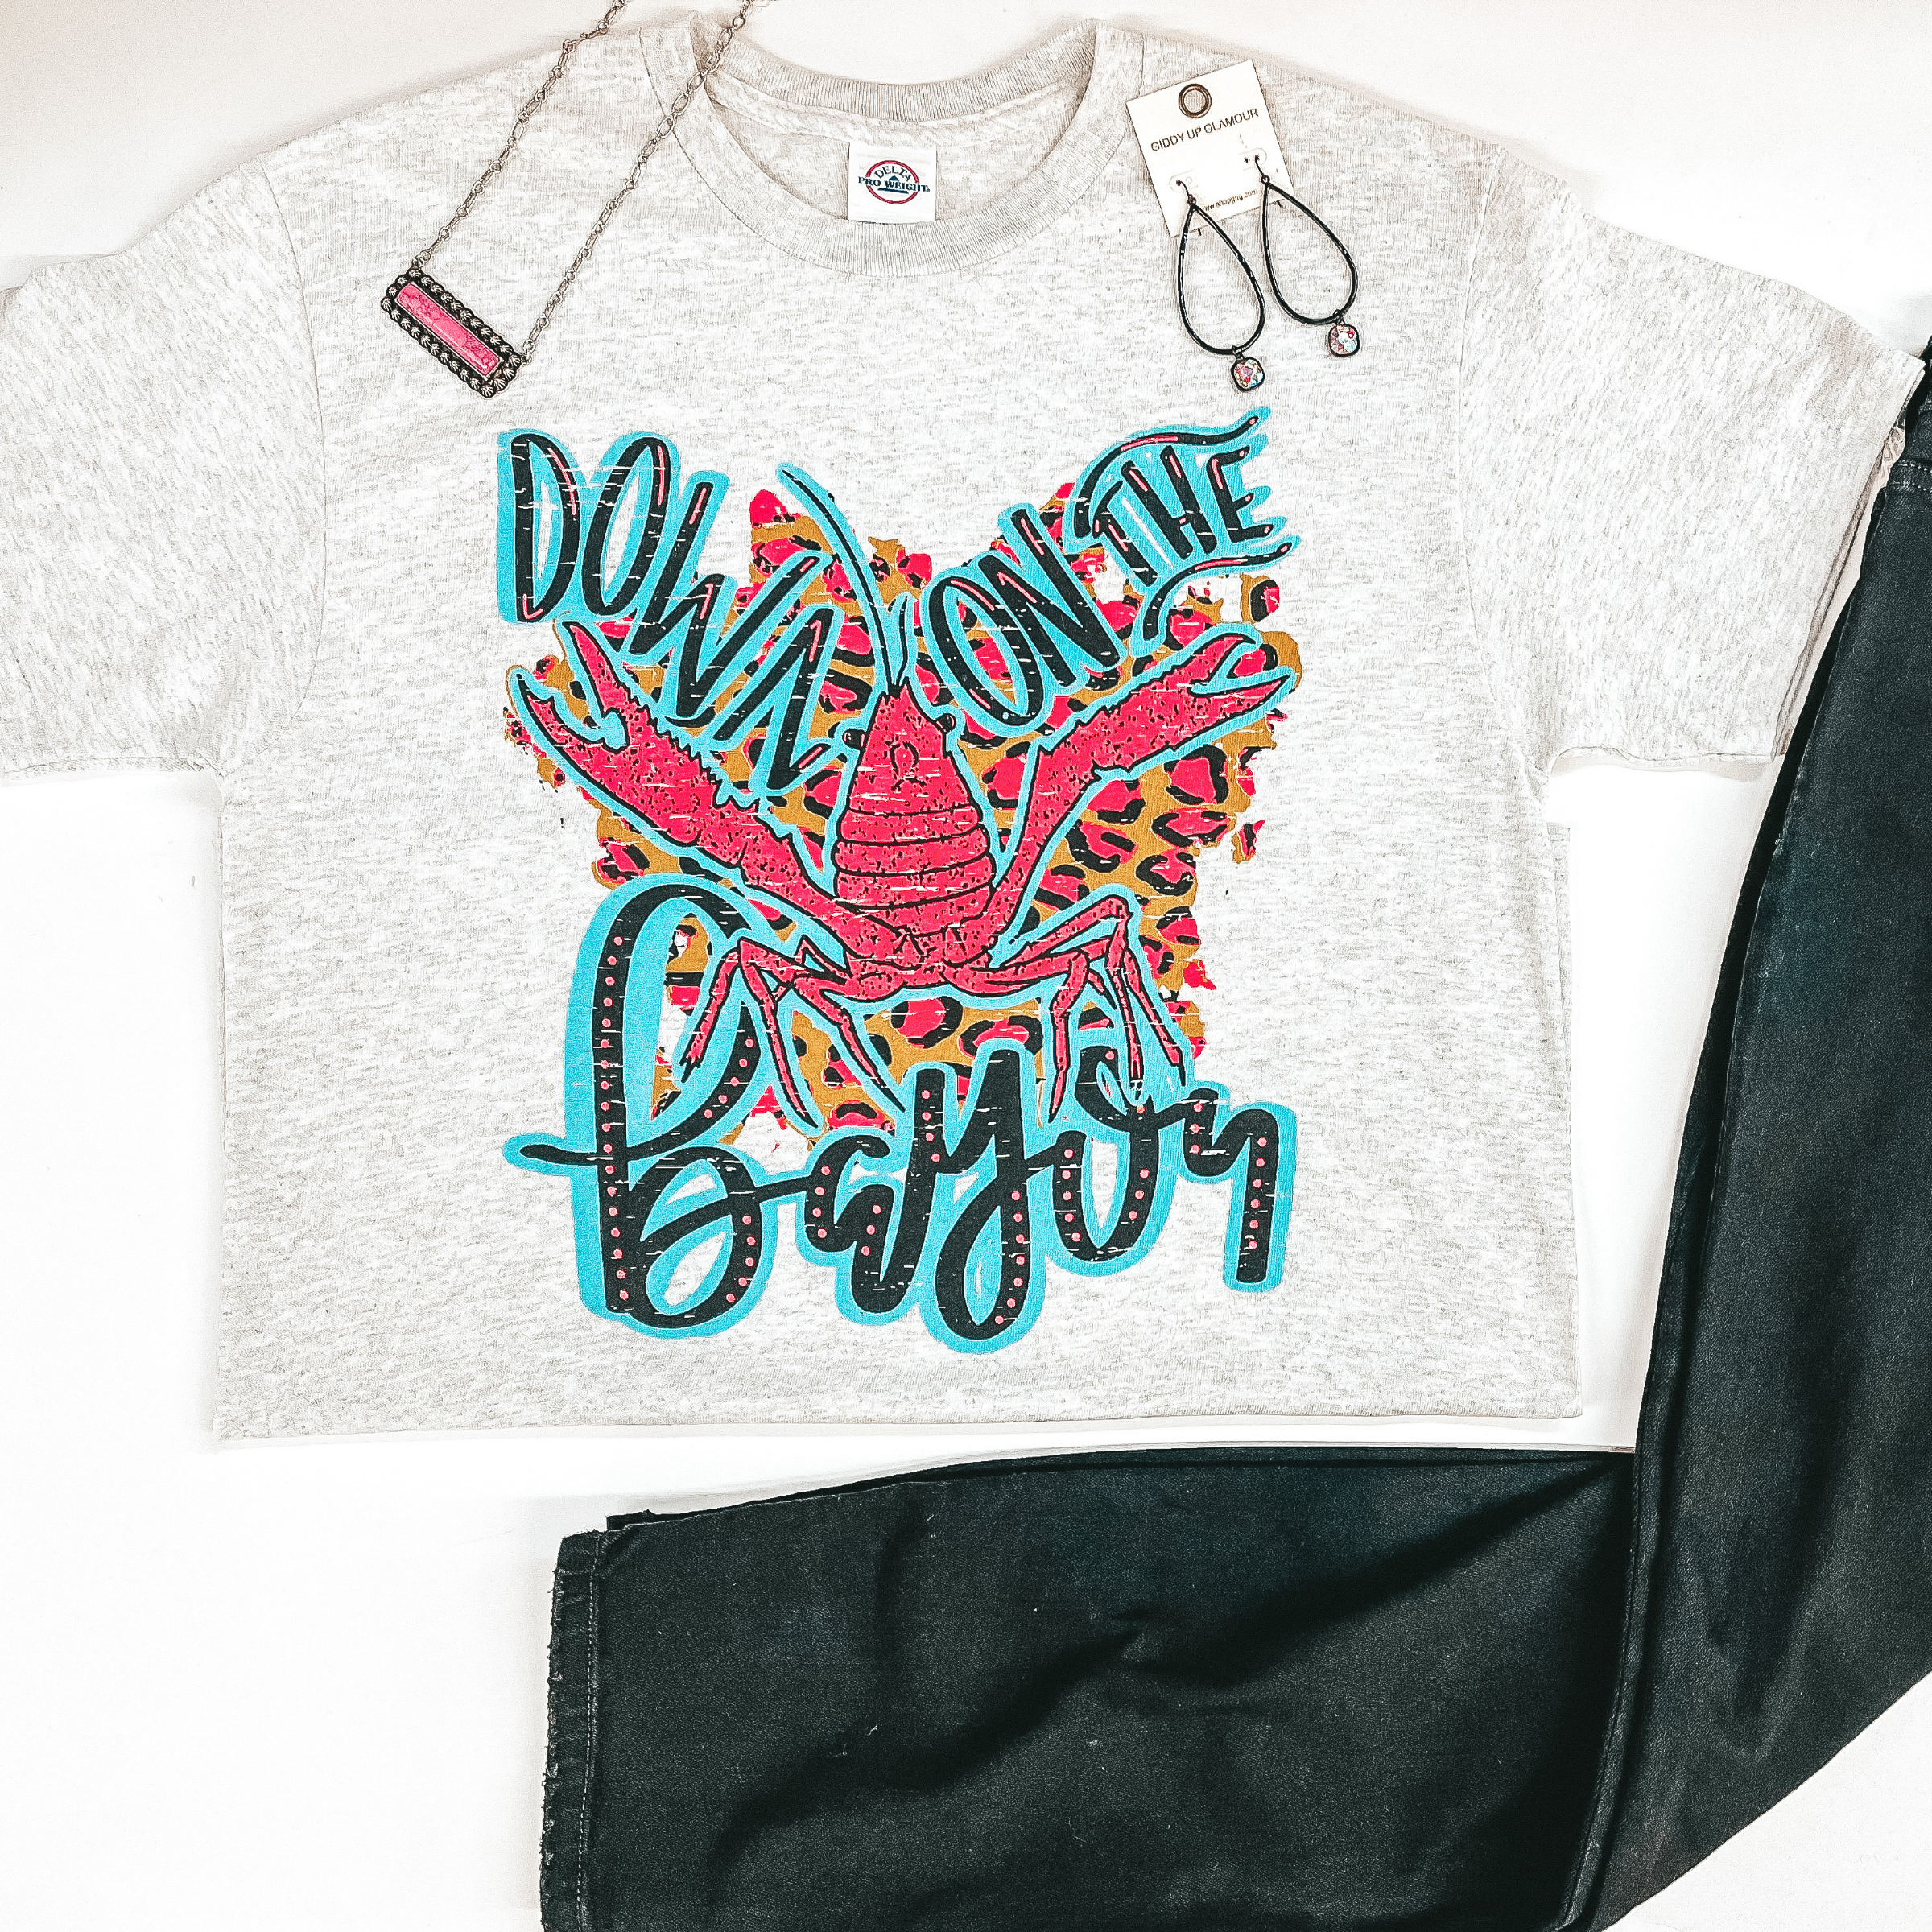 A heather grey tee shirt that is folded in half, exposing the graphic that says "Down On the Bayou" with a hot pink and leopard print crawfish graphic. Pictured with black skinny jeans, hot pink necklace, and crystal earrings.